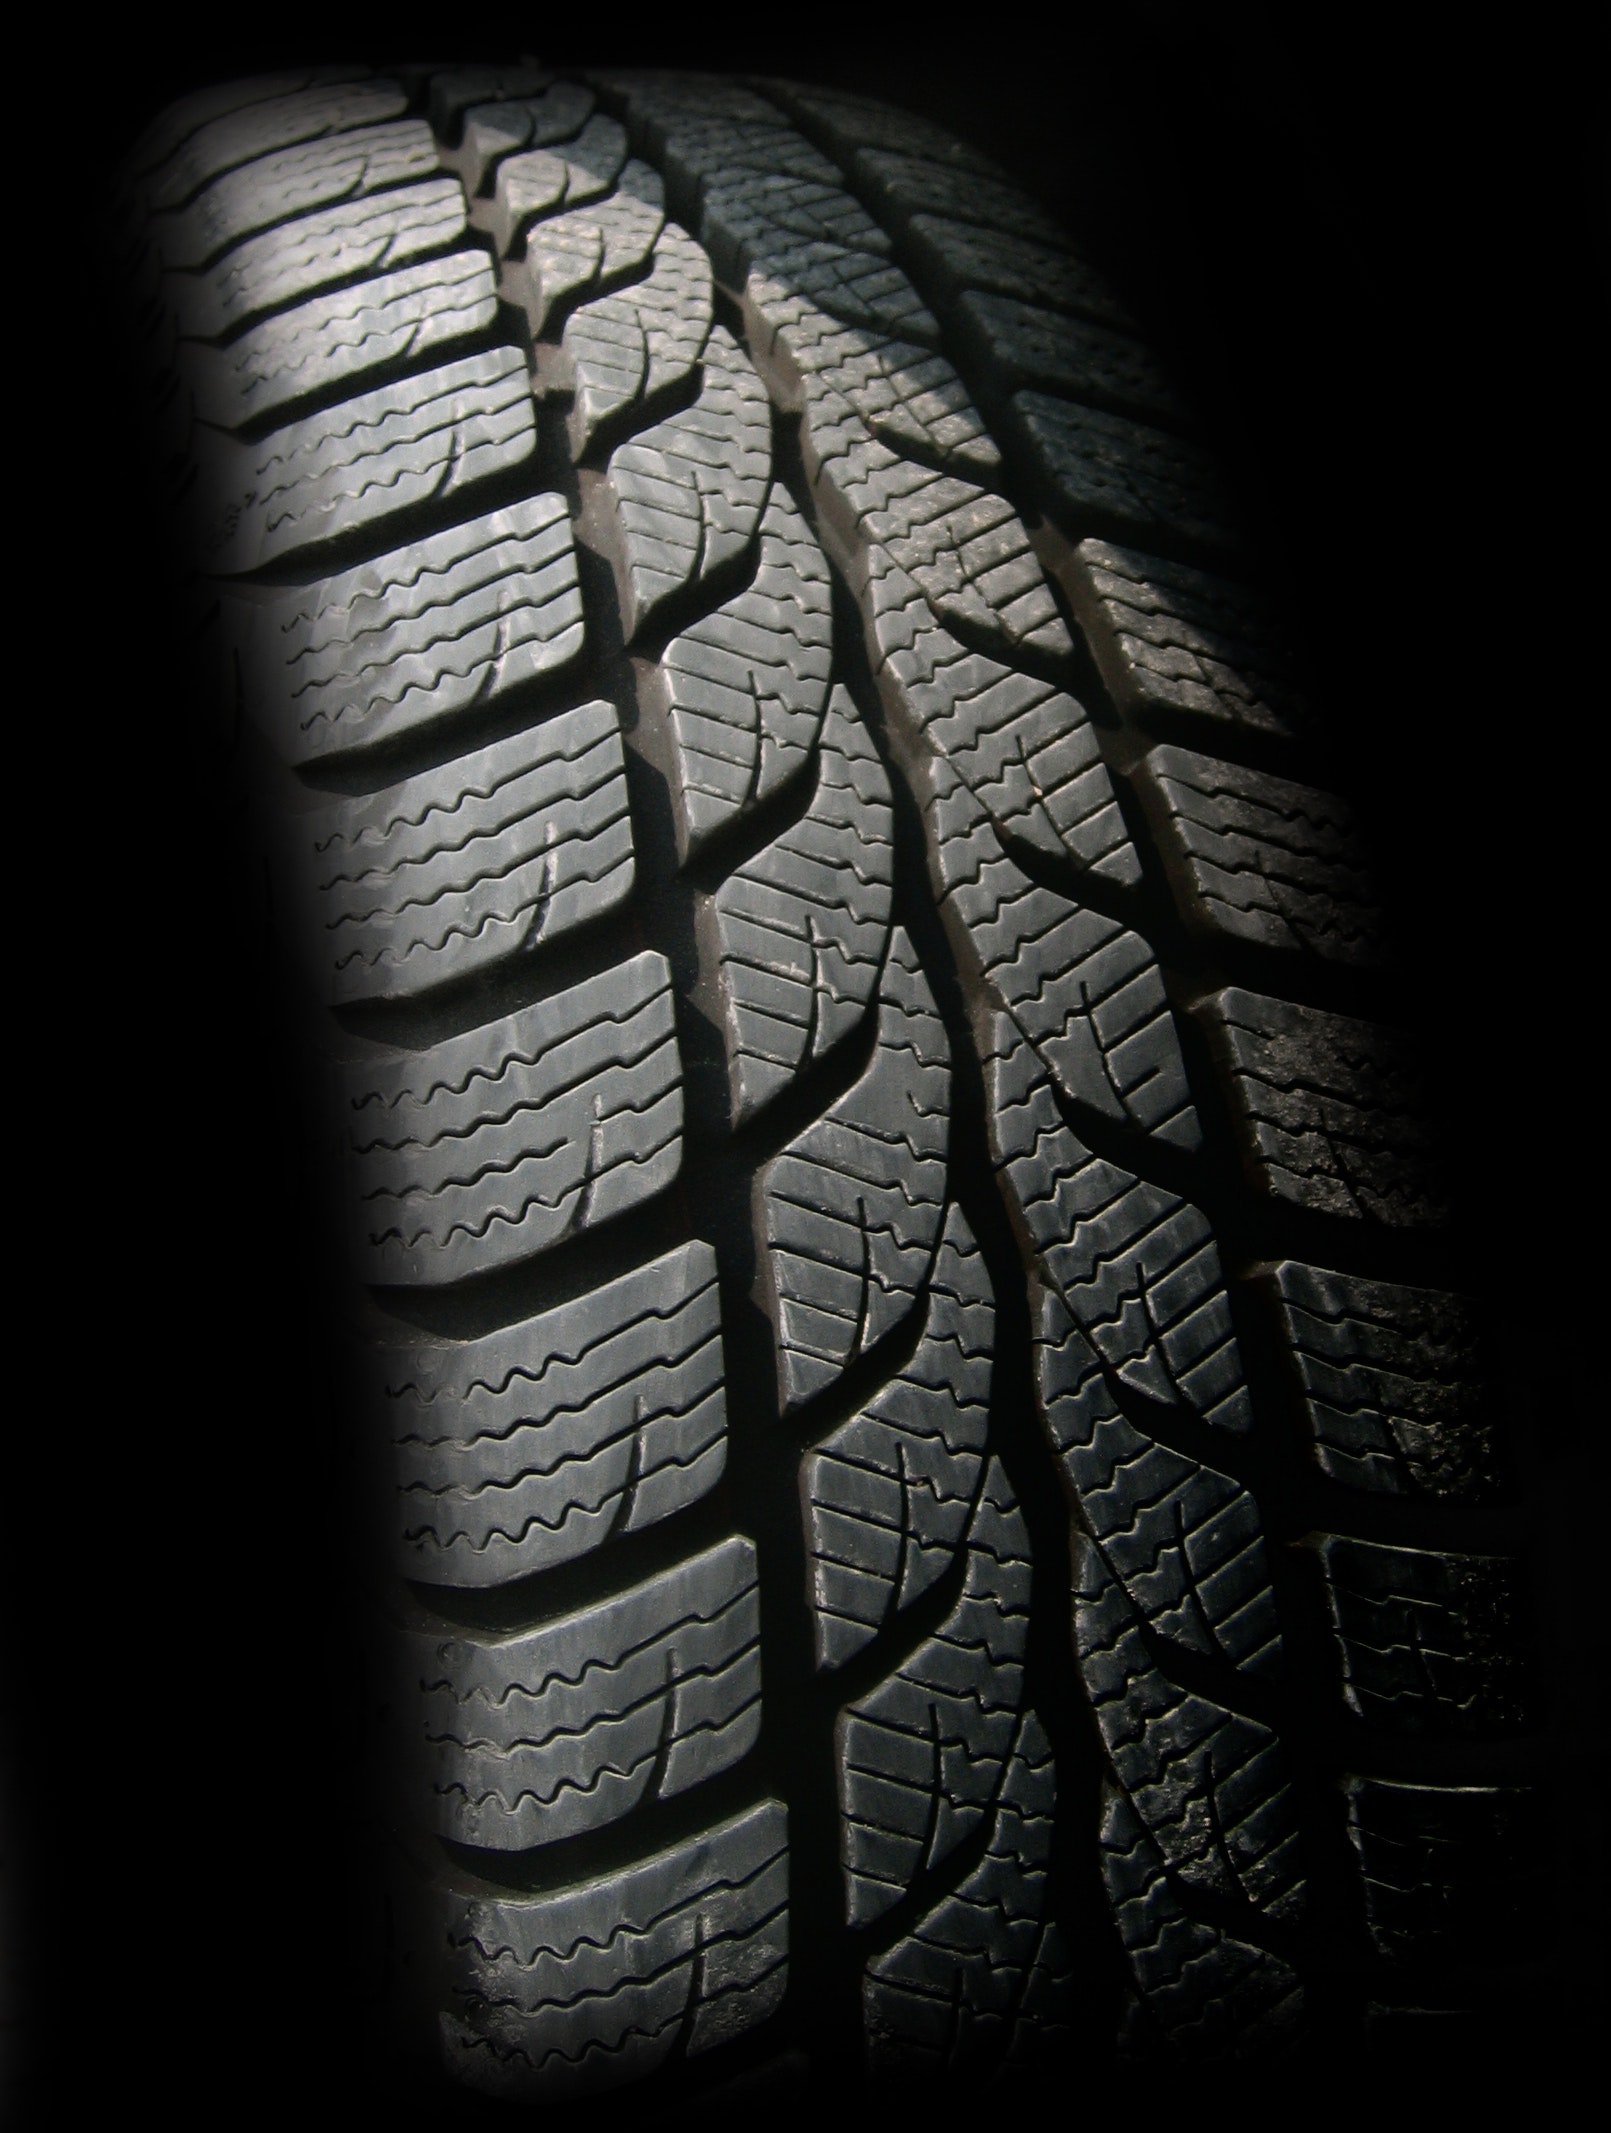 ﻿How To Choose the Right Tires for Your Vehicle